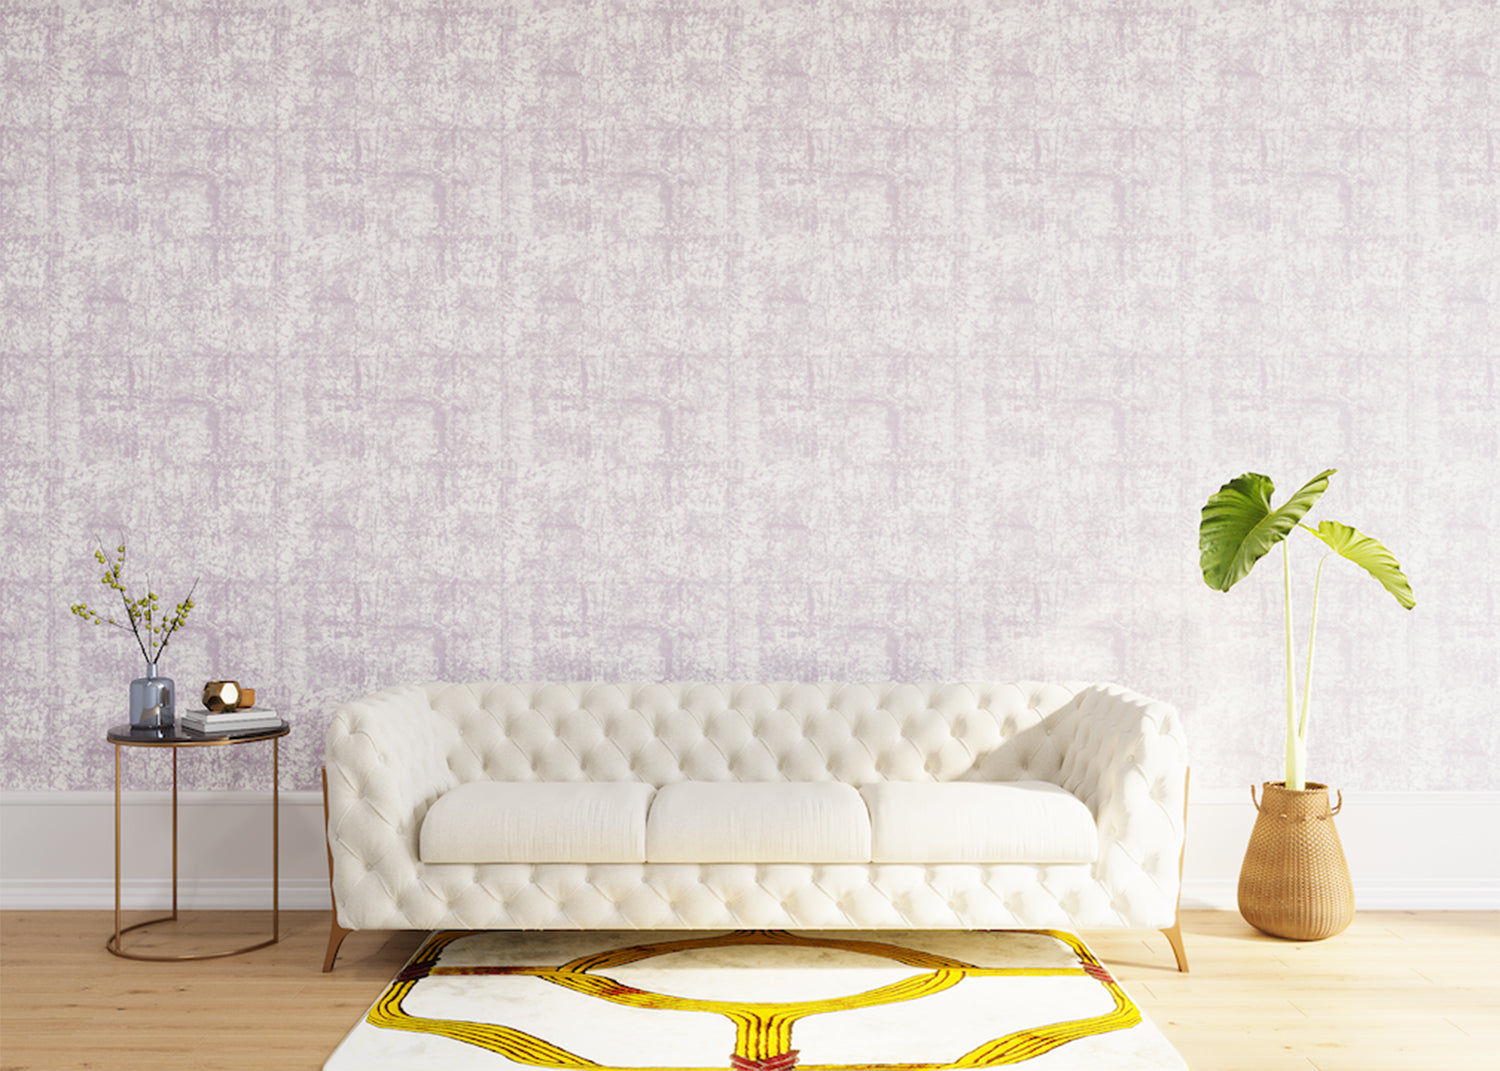 Styled living room tableau with a wall papered in an organic textural print in light purple on a white field.